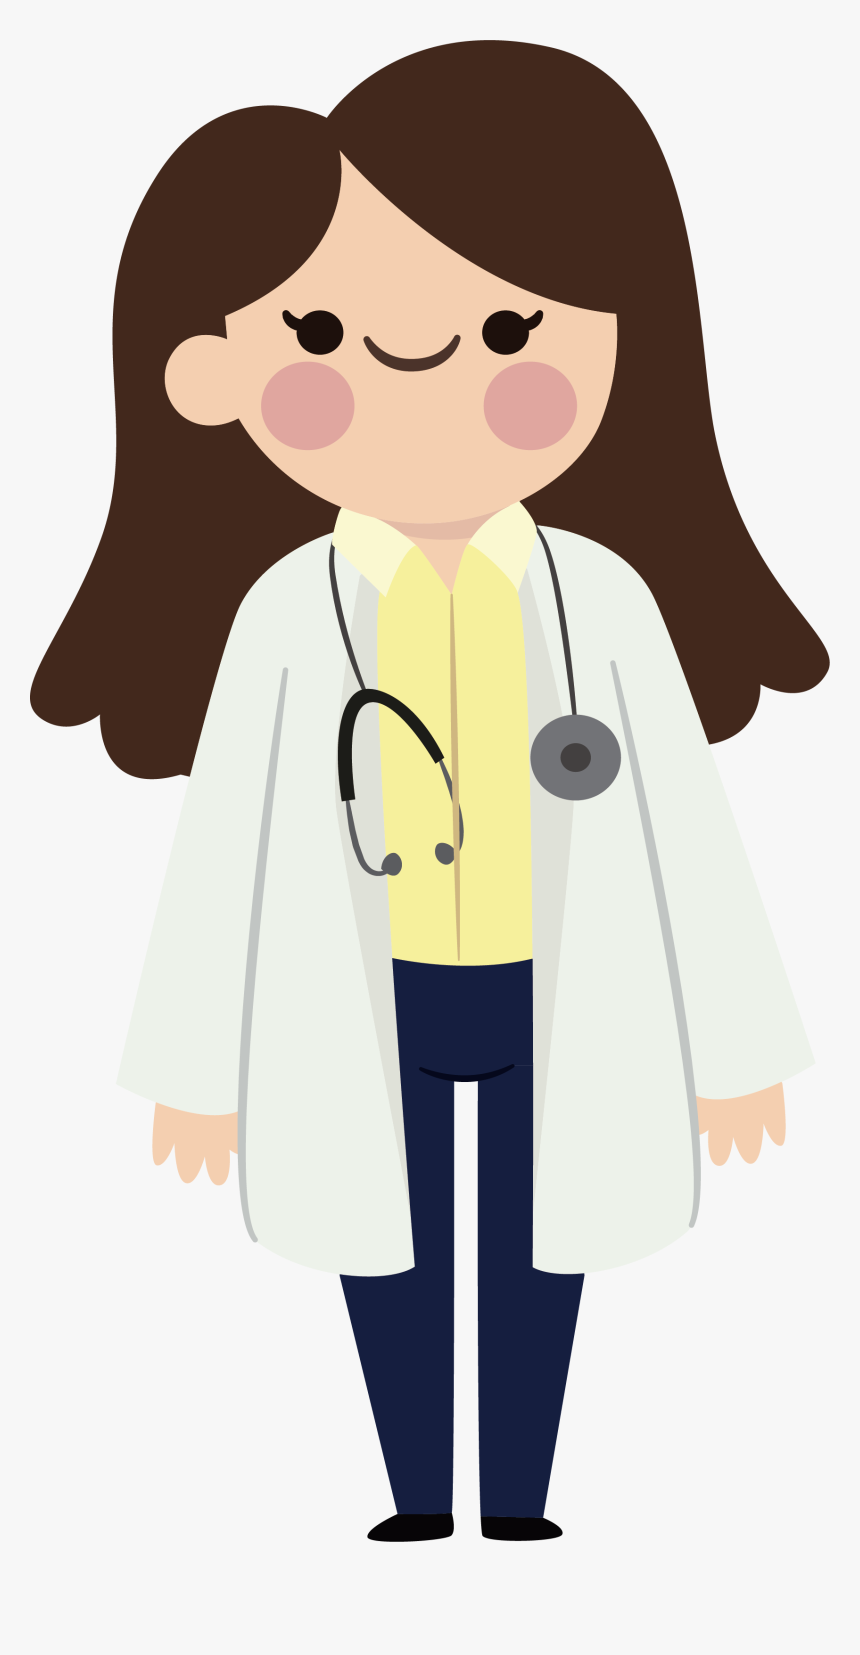 Primary Care Physician Clipart Free